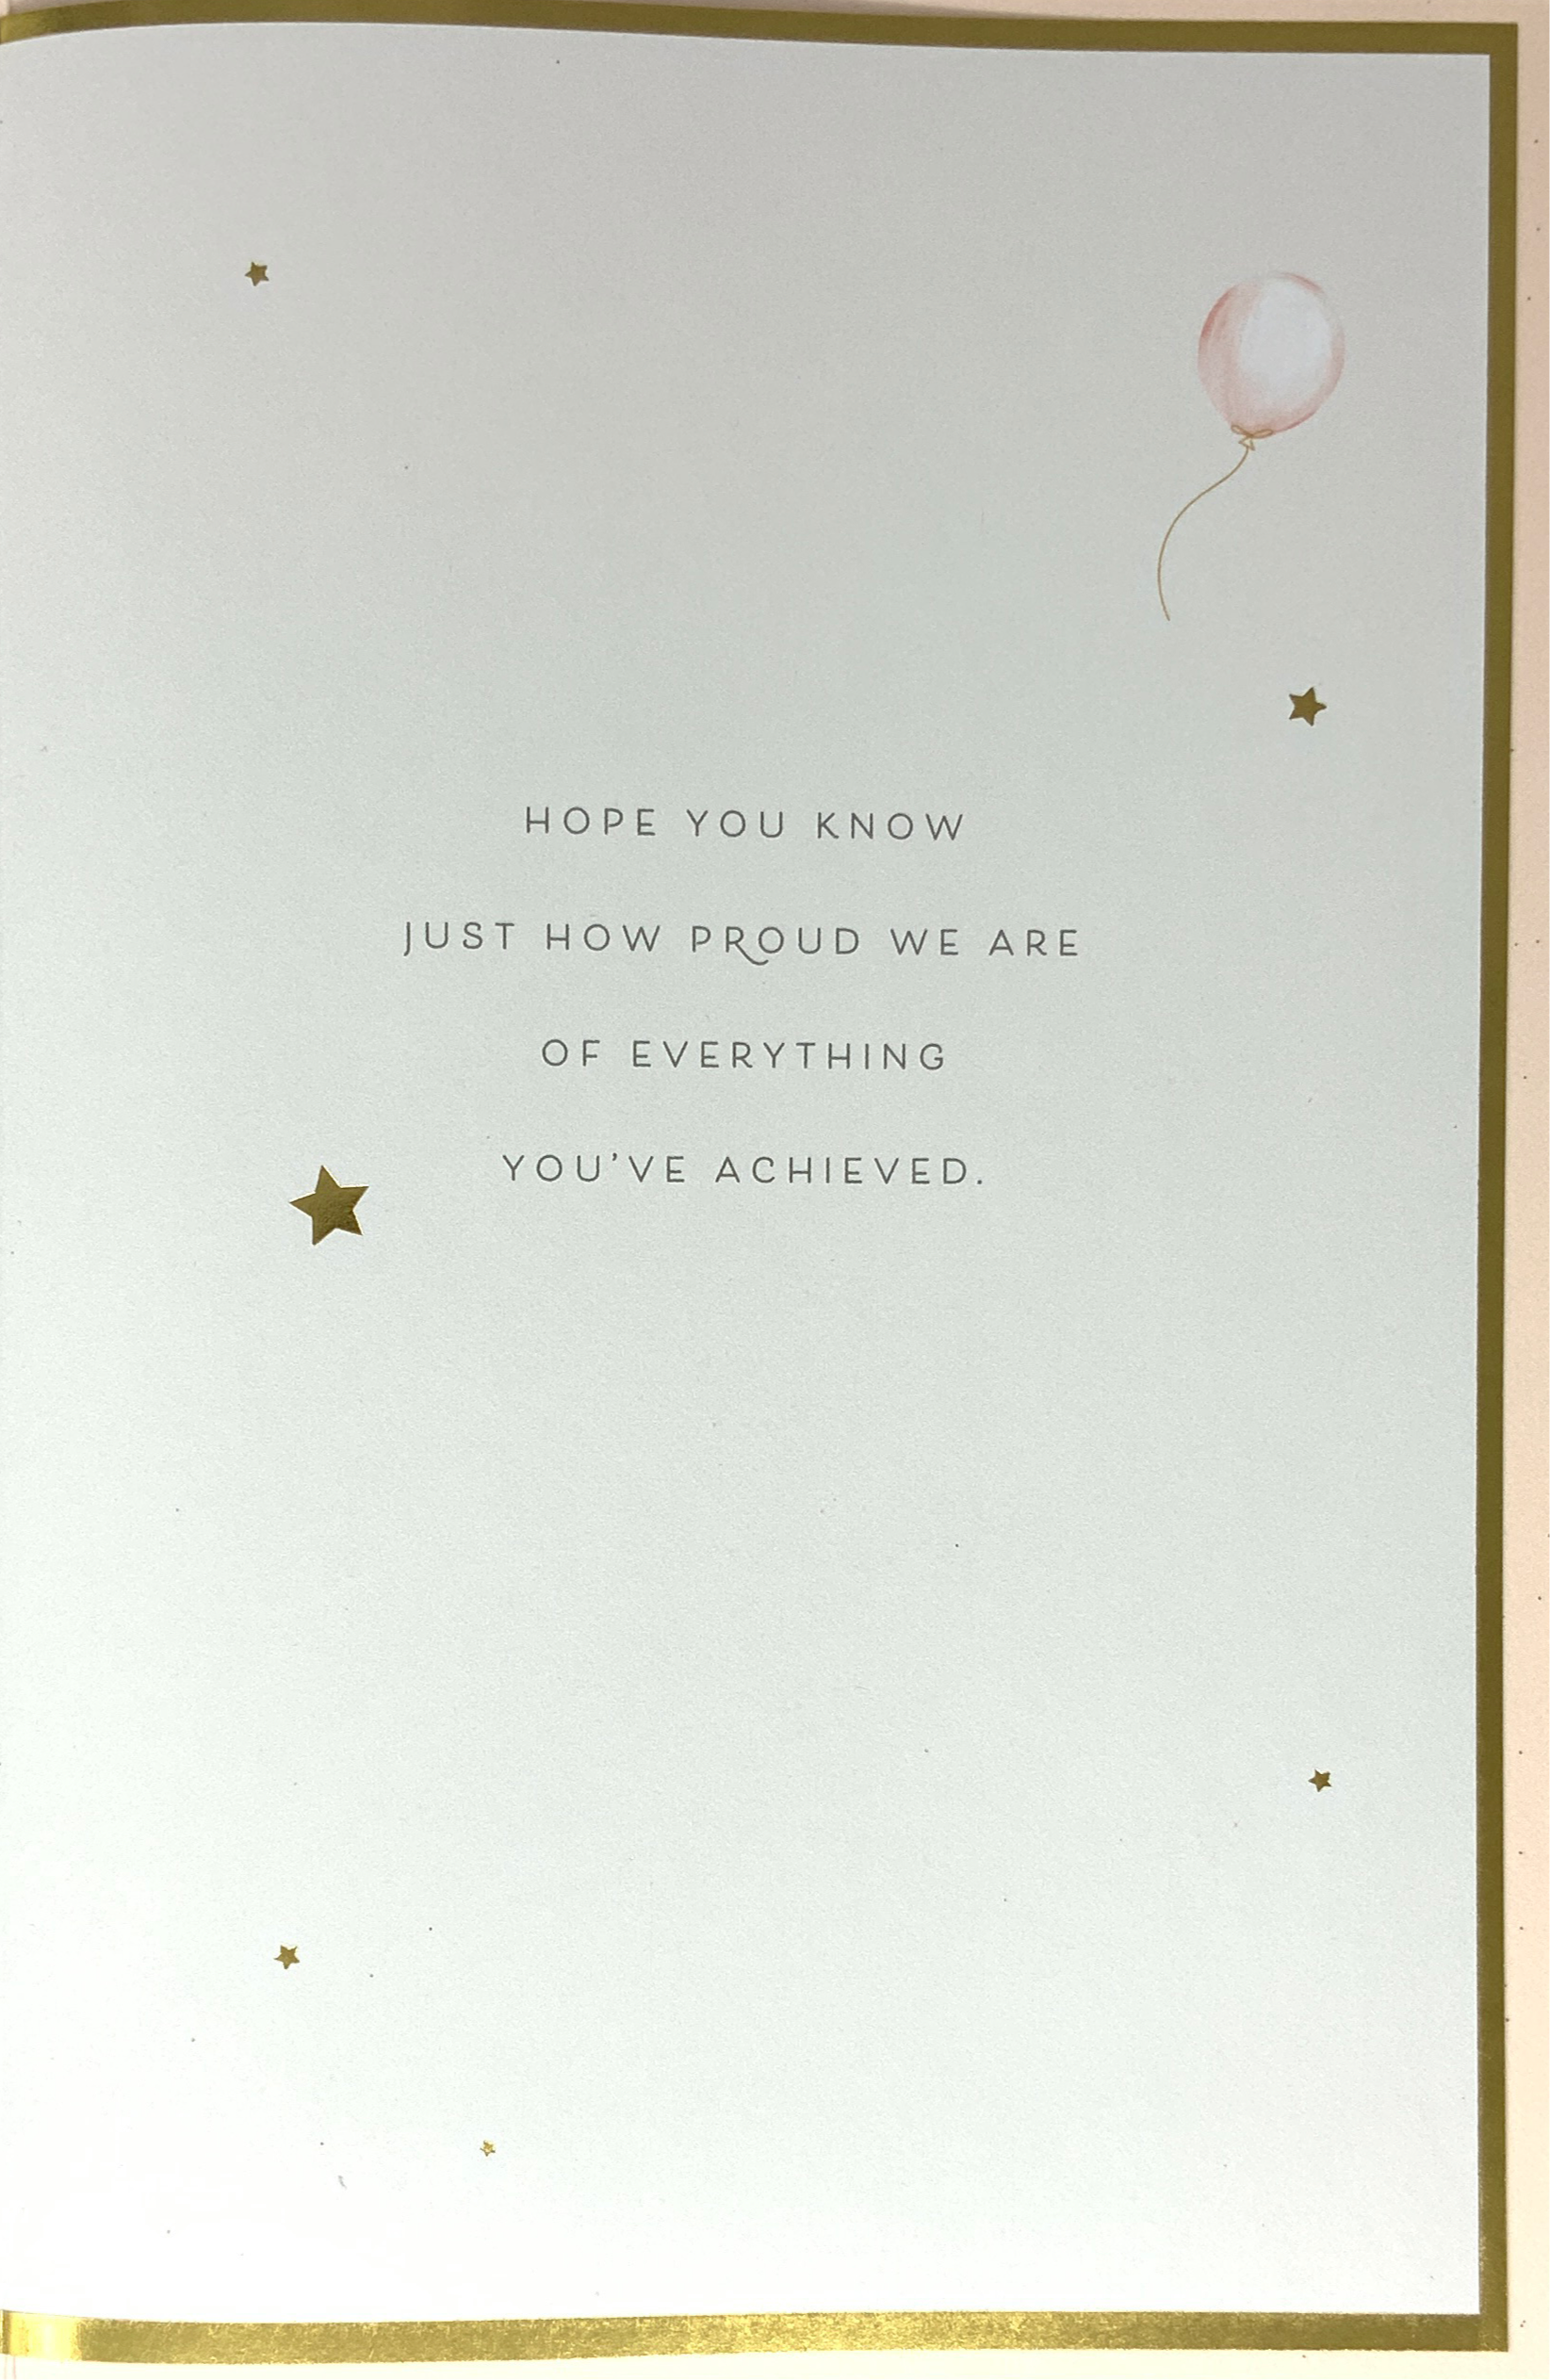 Graduation Card - For You Granddaughter